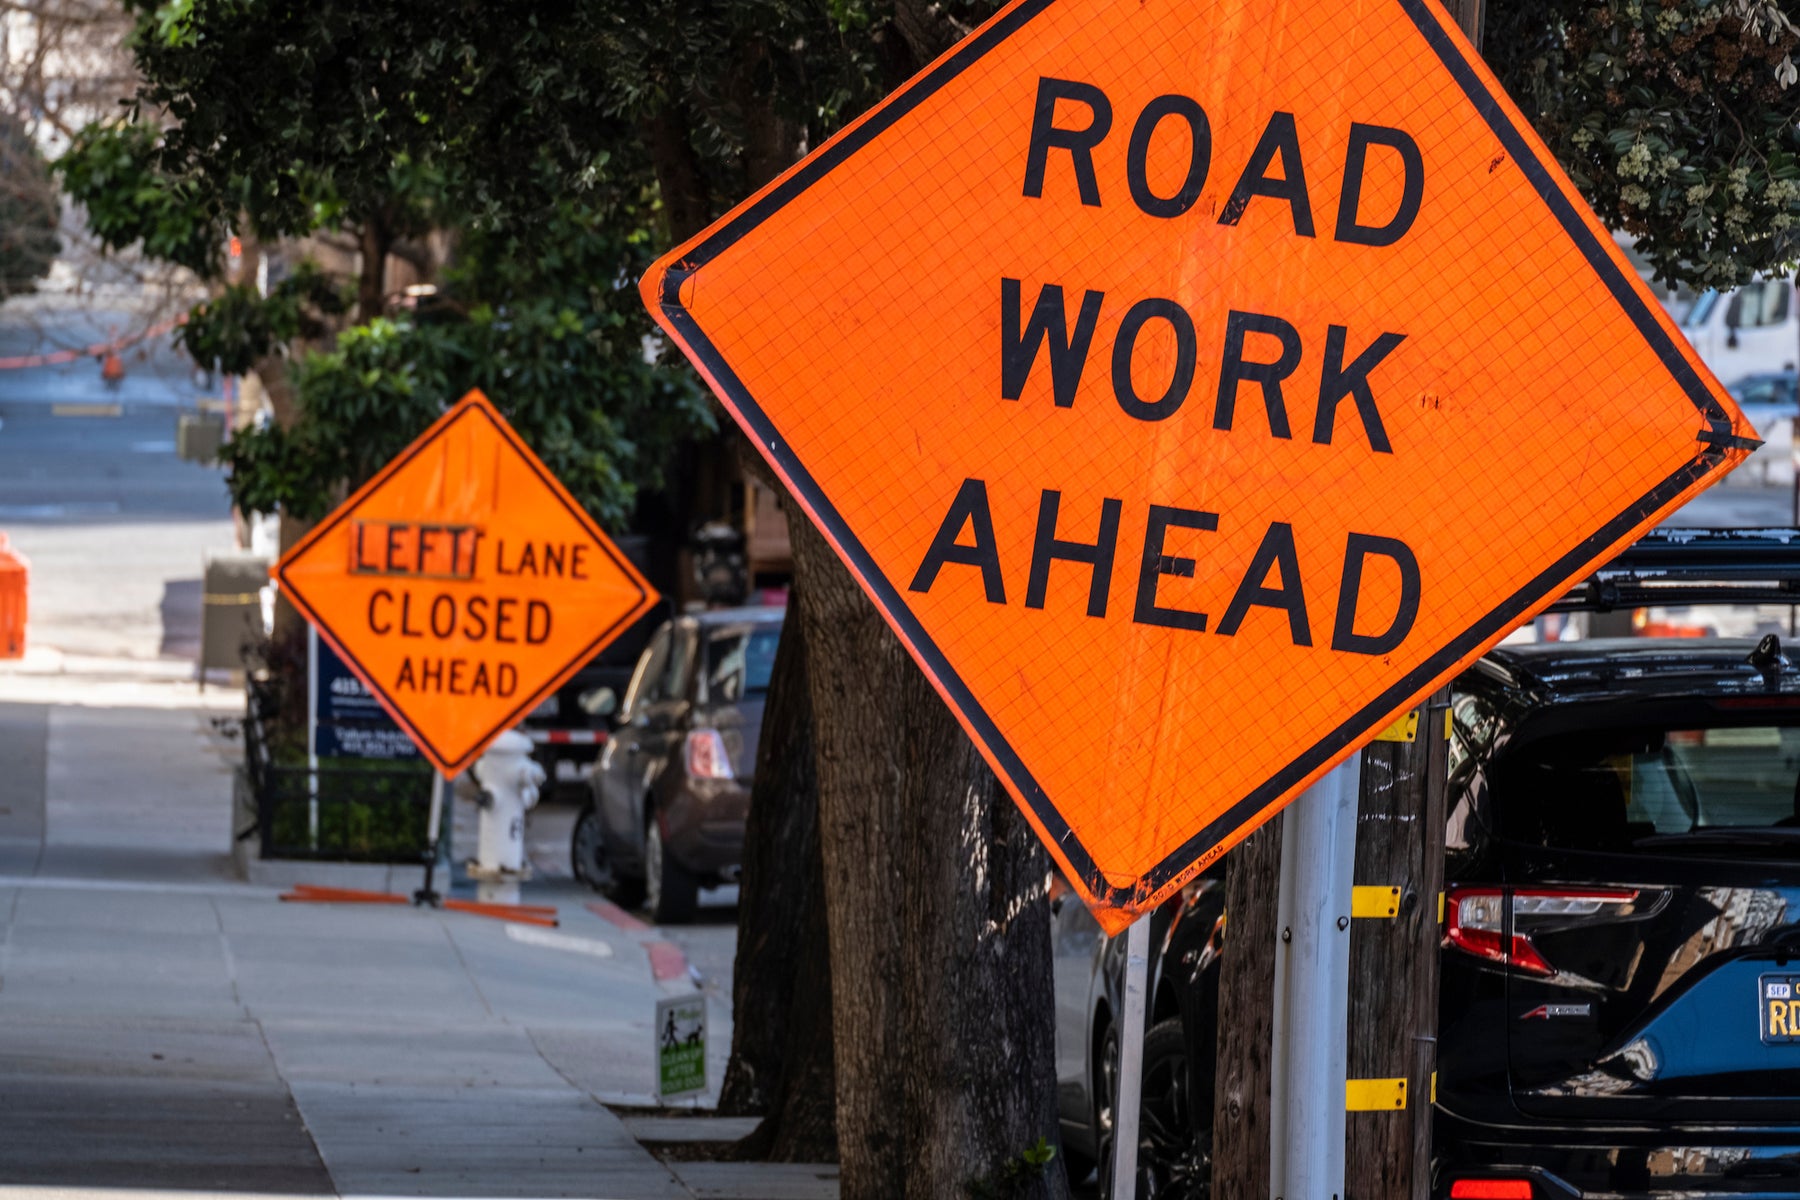 Decoding Road Work Ahead Traffic Signs - Know What to Expect